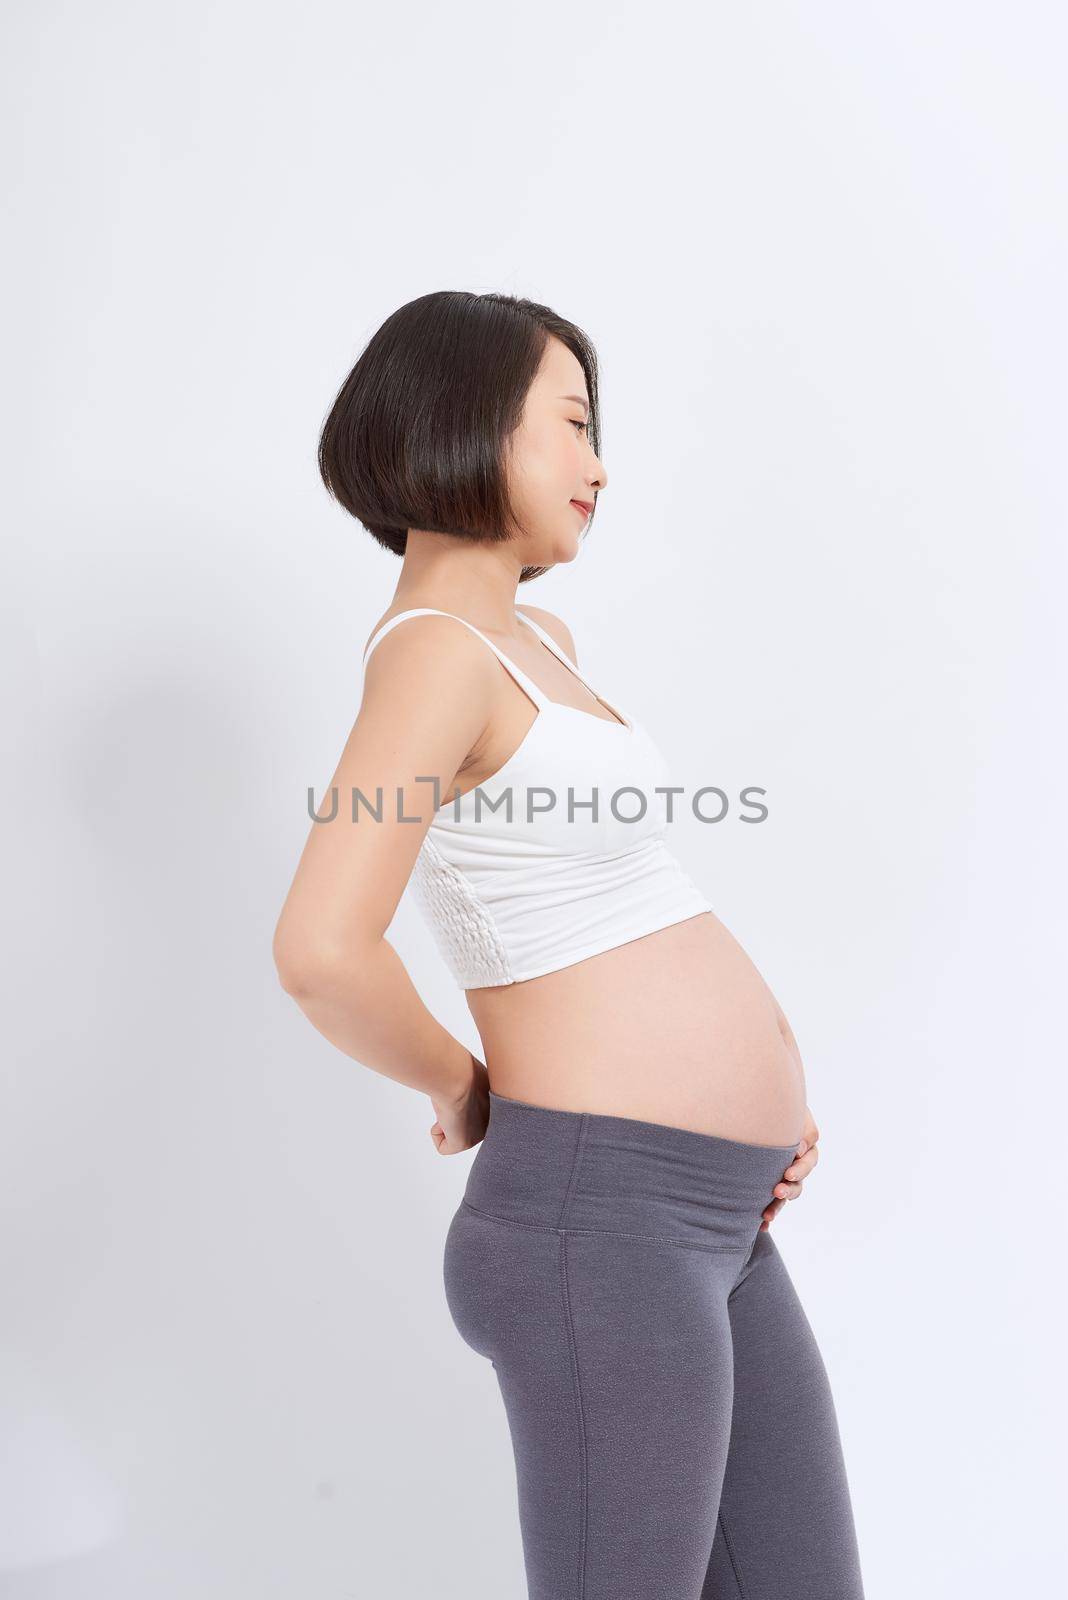 Pregnant female having back pain by makidotvn